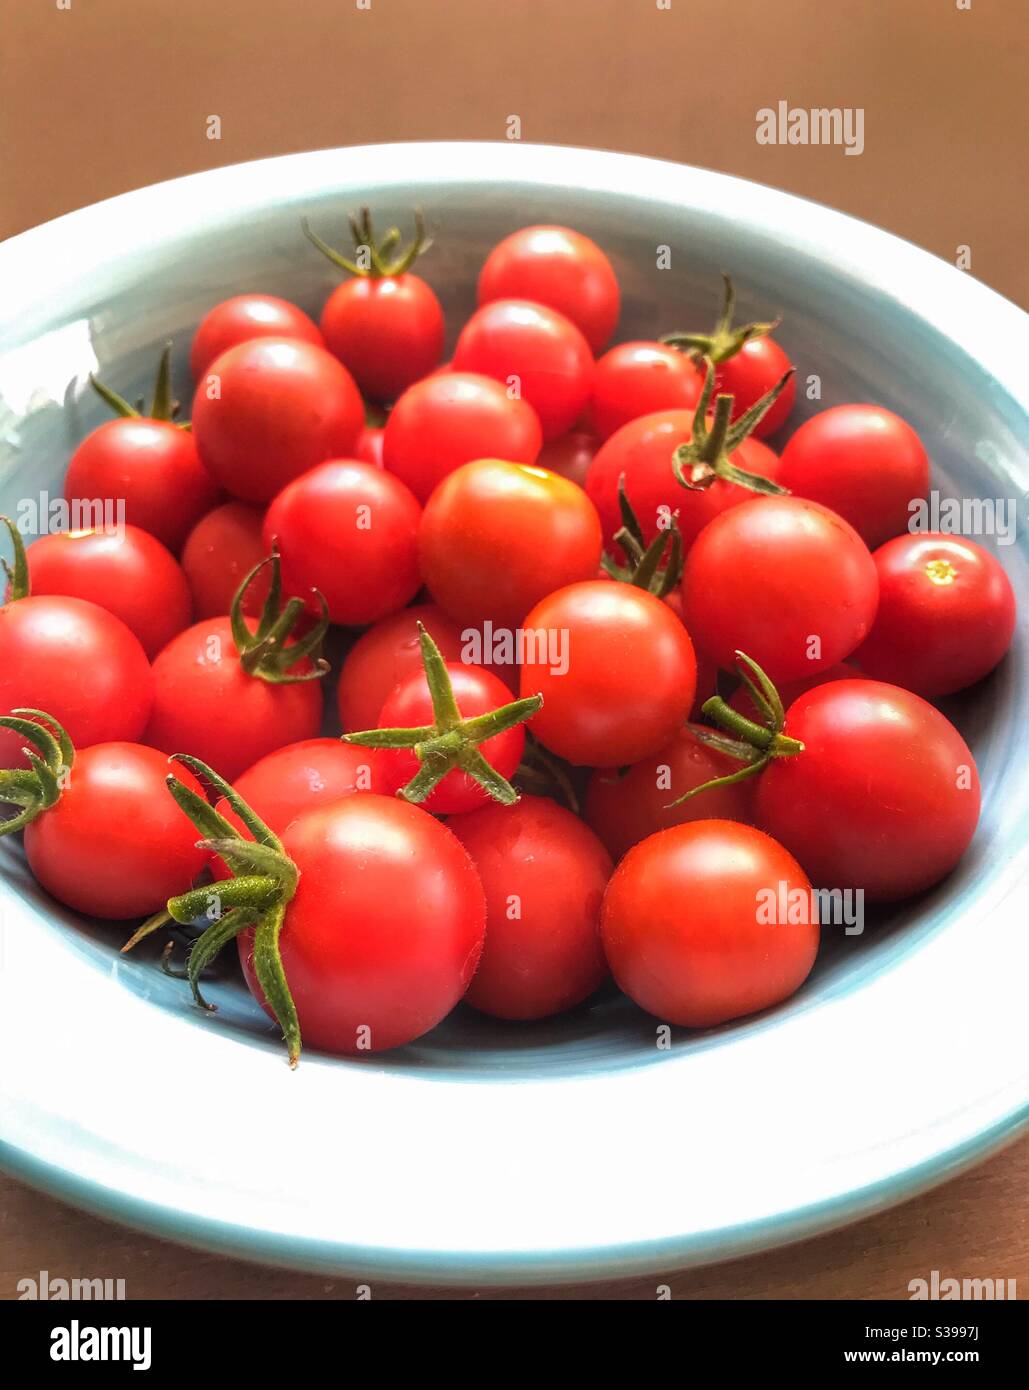 Cherry tomatoes in a bowl Stock Photo